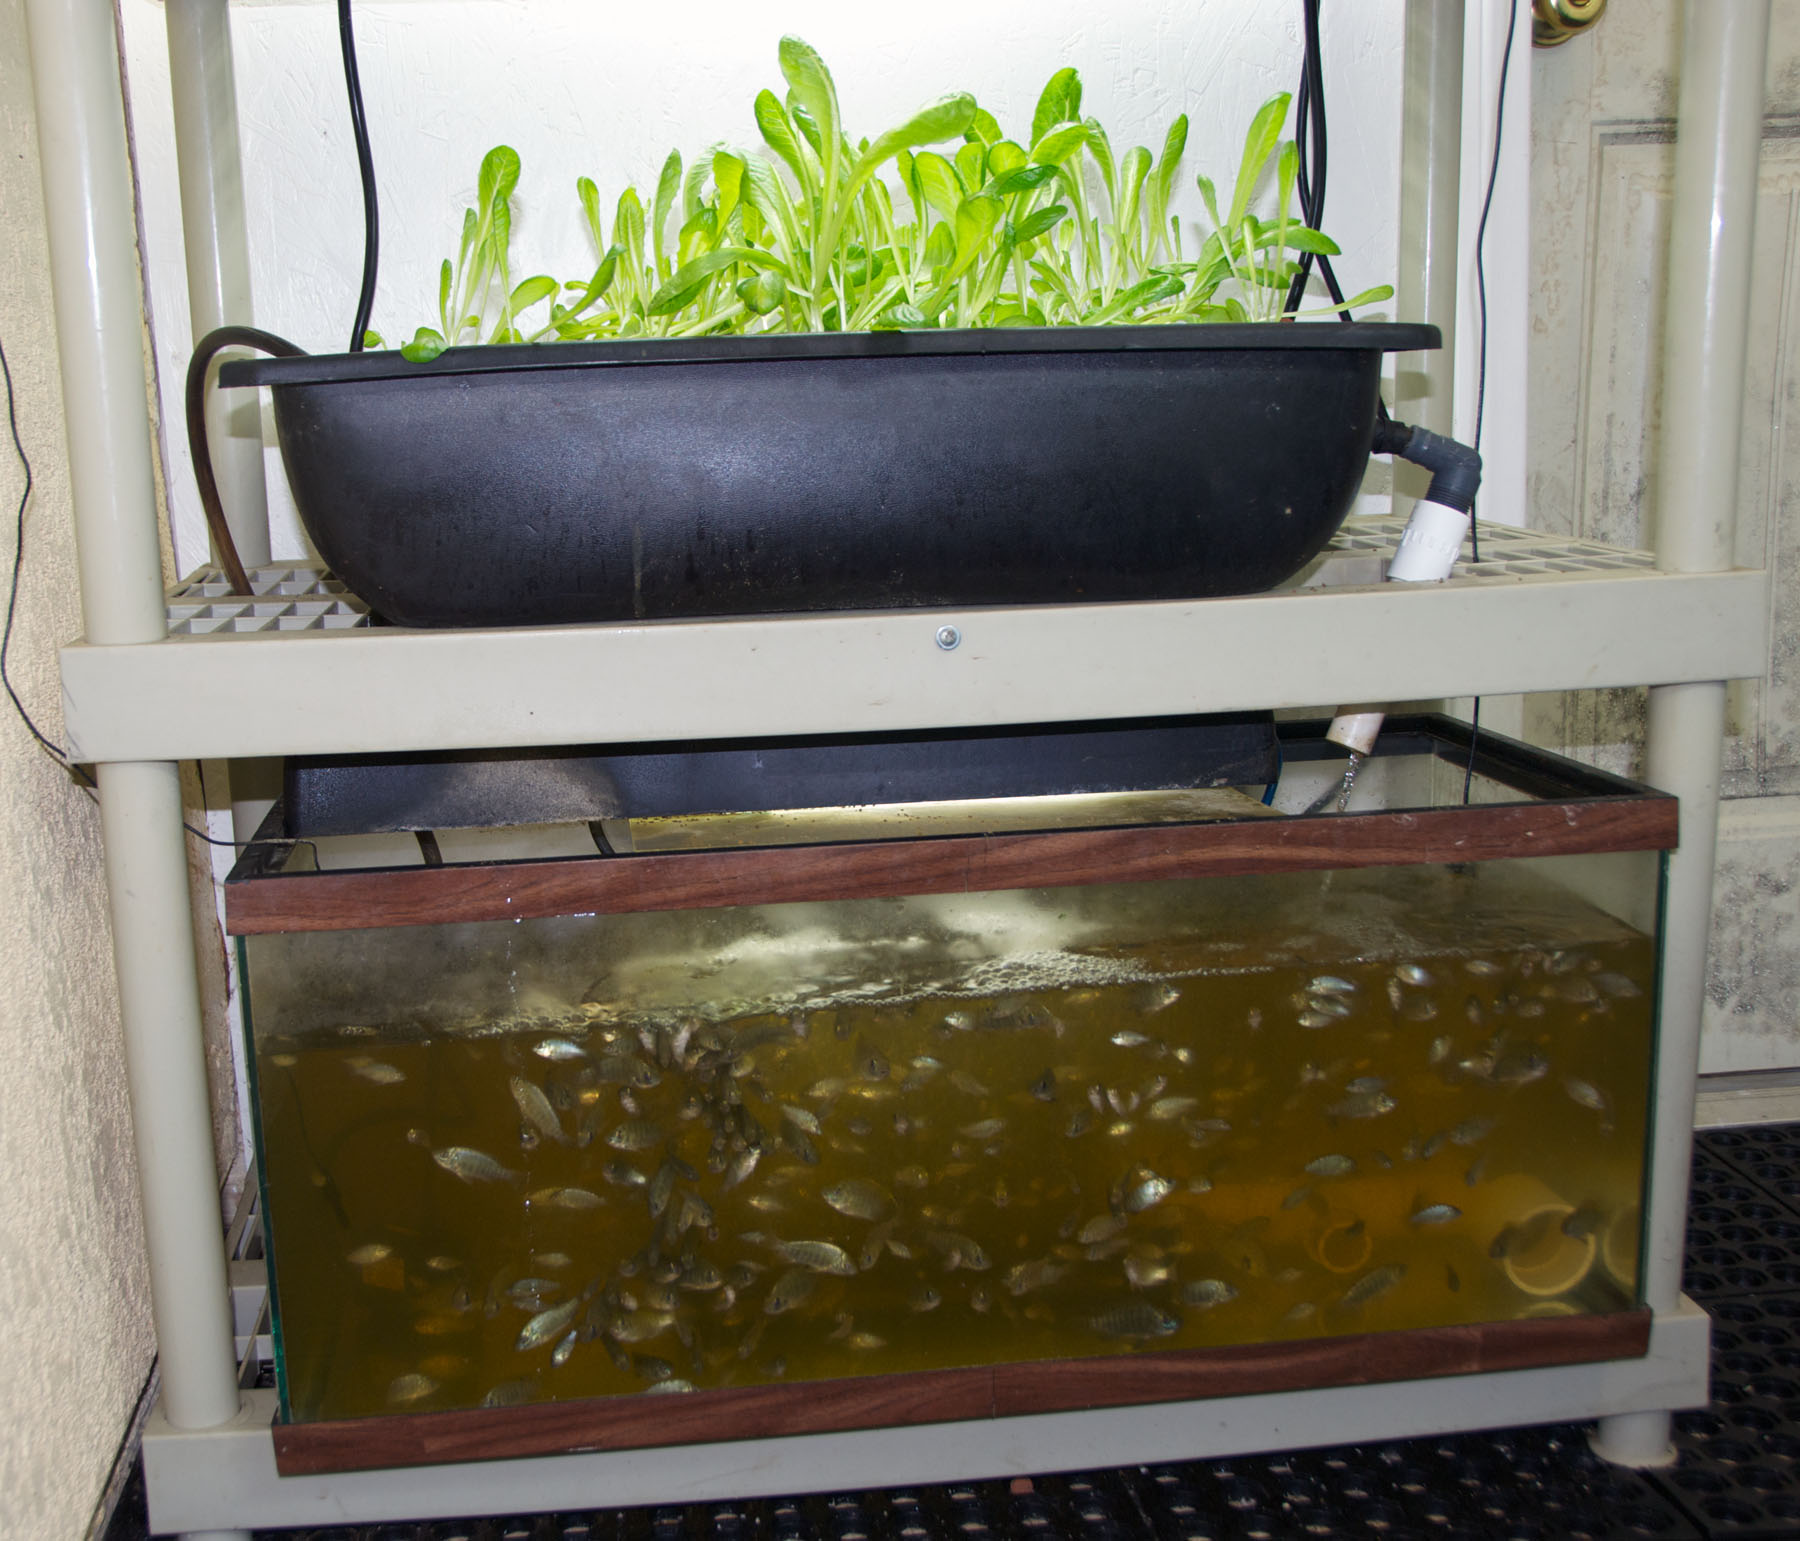 Our Mini Aquaponics System is also our Tilapia Nursery